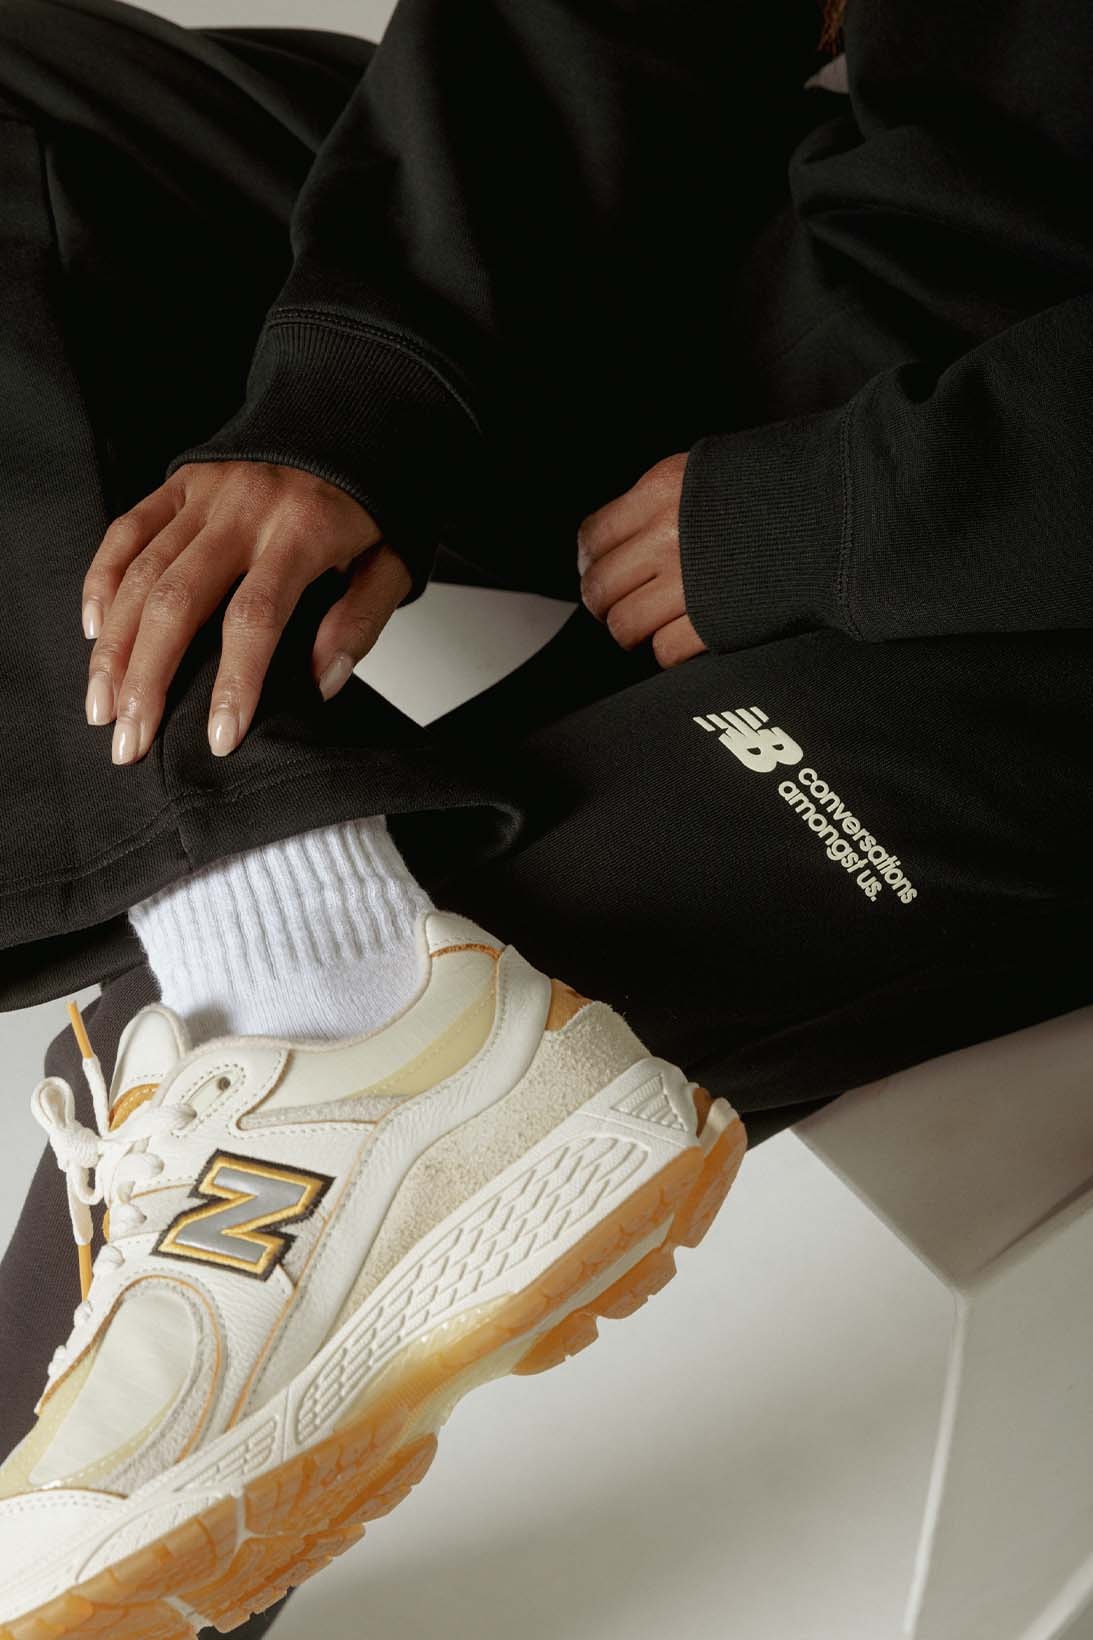 Here's an Official Look at the Joe Freshgoods x New Balance Collection -  KLEKT Blog